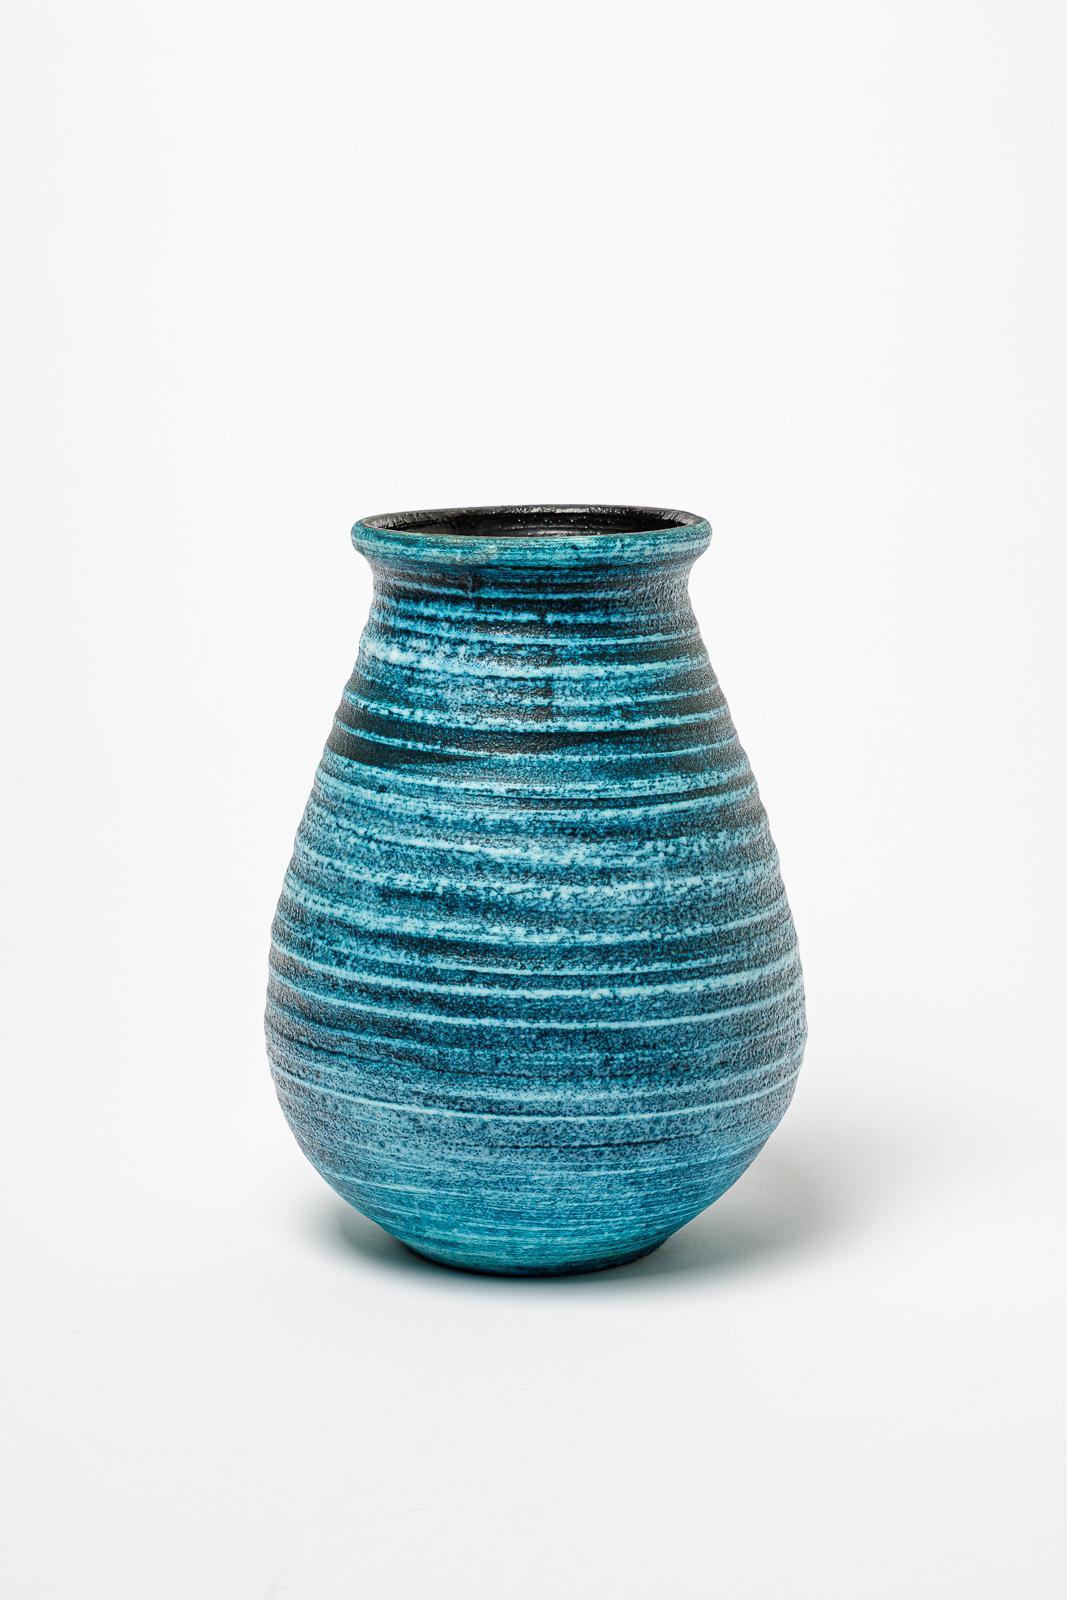 French Blue glazed ceramic vase by Accolay, circa 1960-1970. For Sale